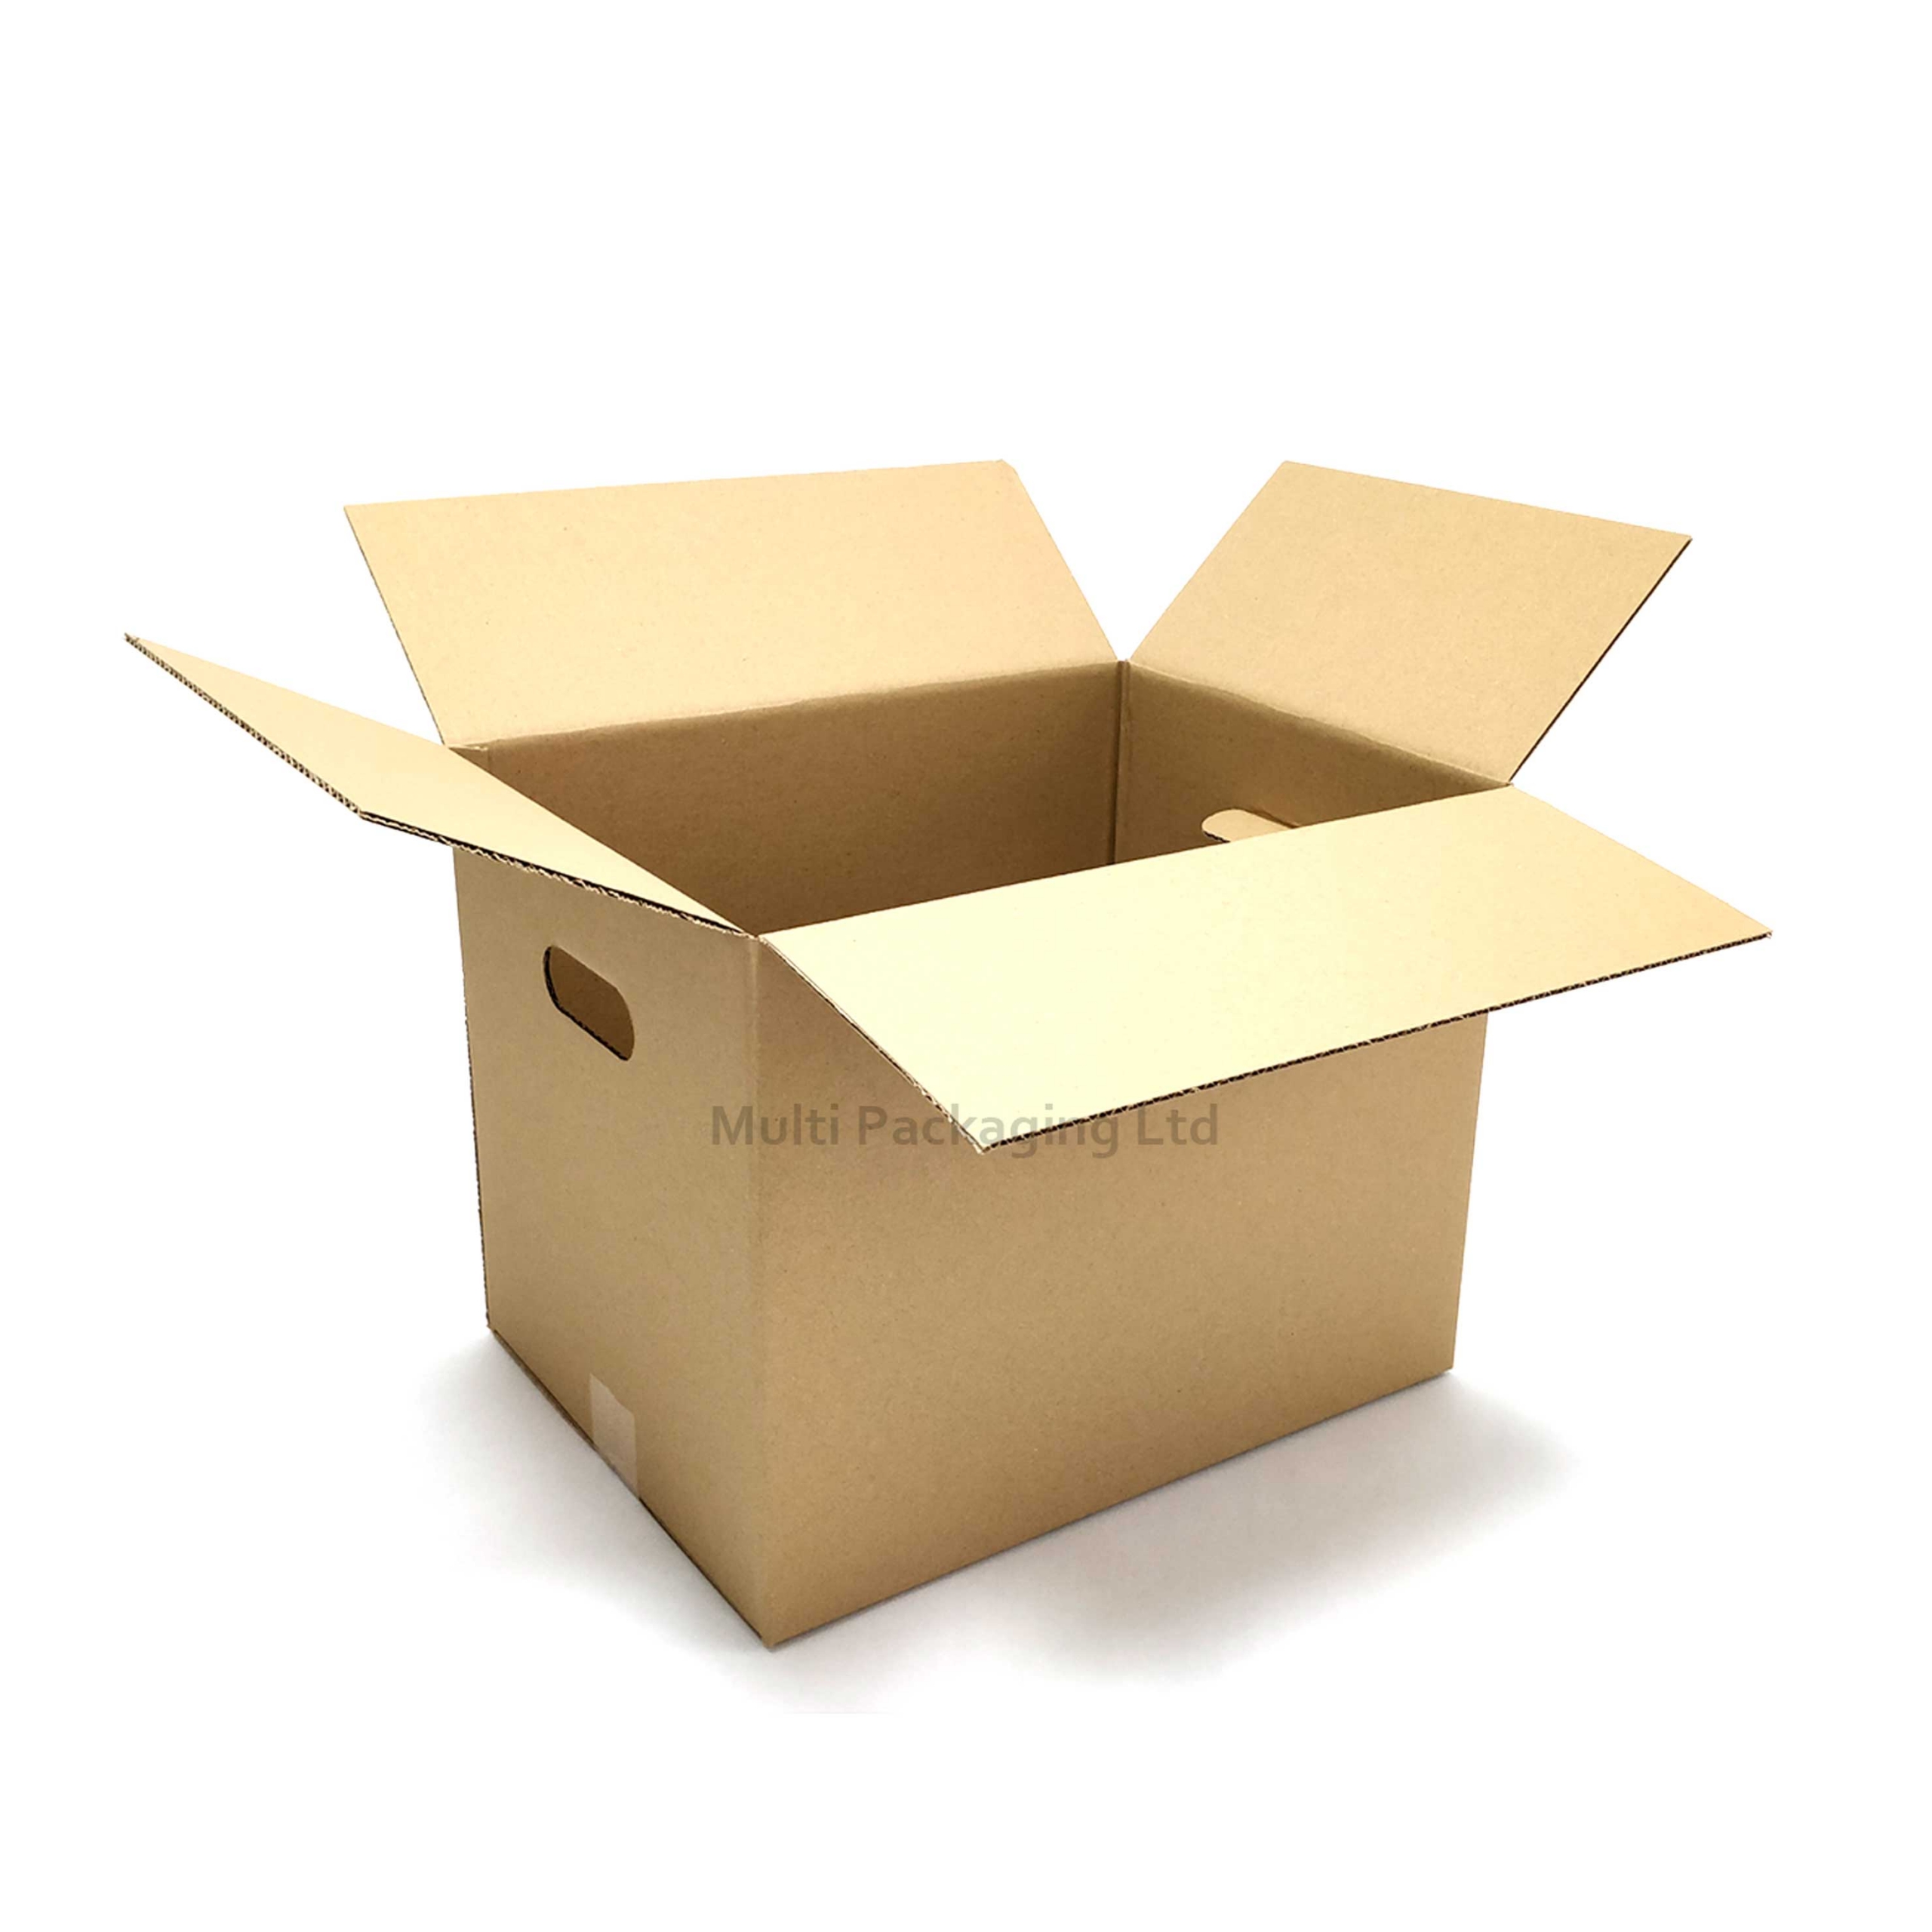 https://multipackaging.com.mt/wp-content/uploads/2020/10/Box-Delivery-scaled.jpg